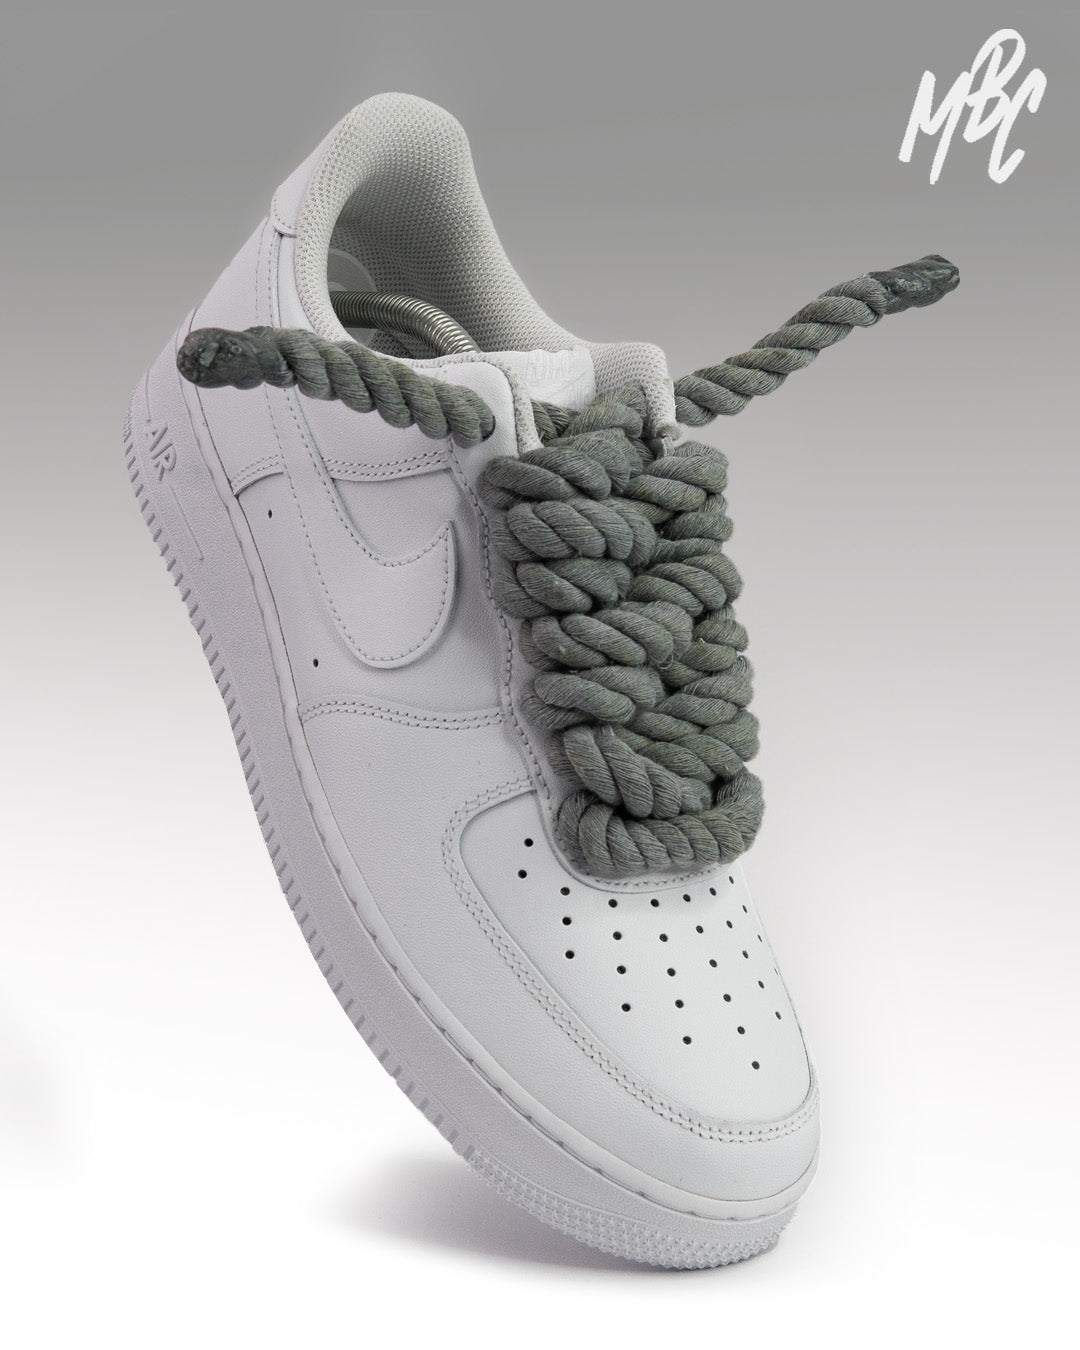 Shoes, Custom Air Forces With Rope Laces And Flower Patch